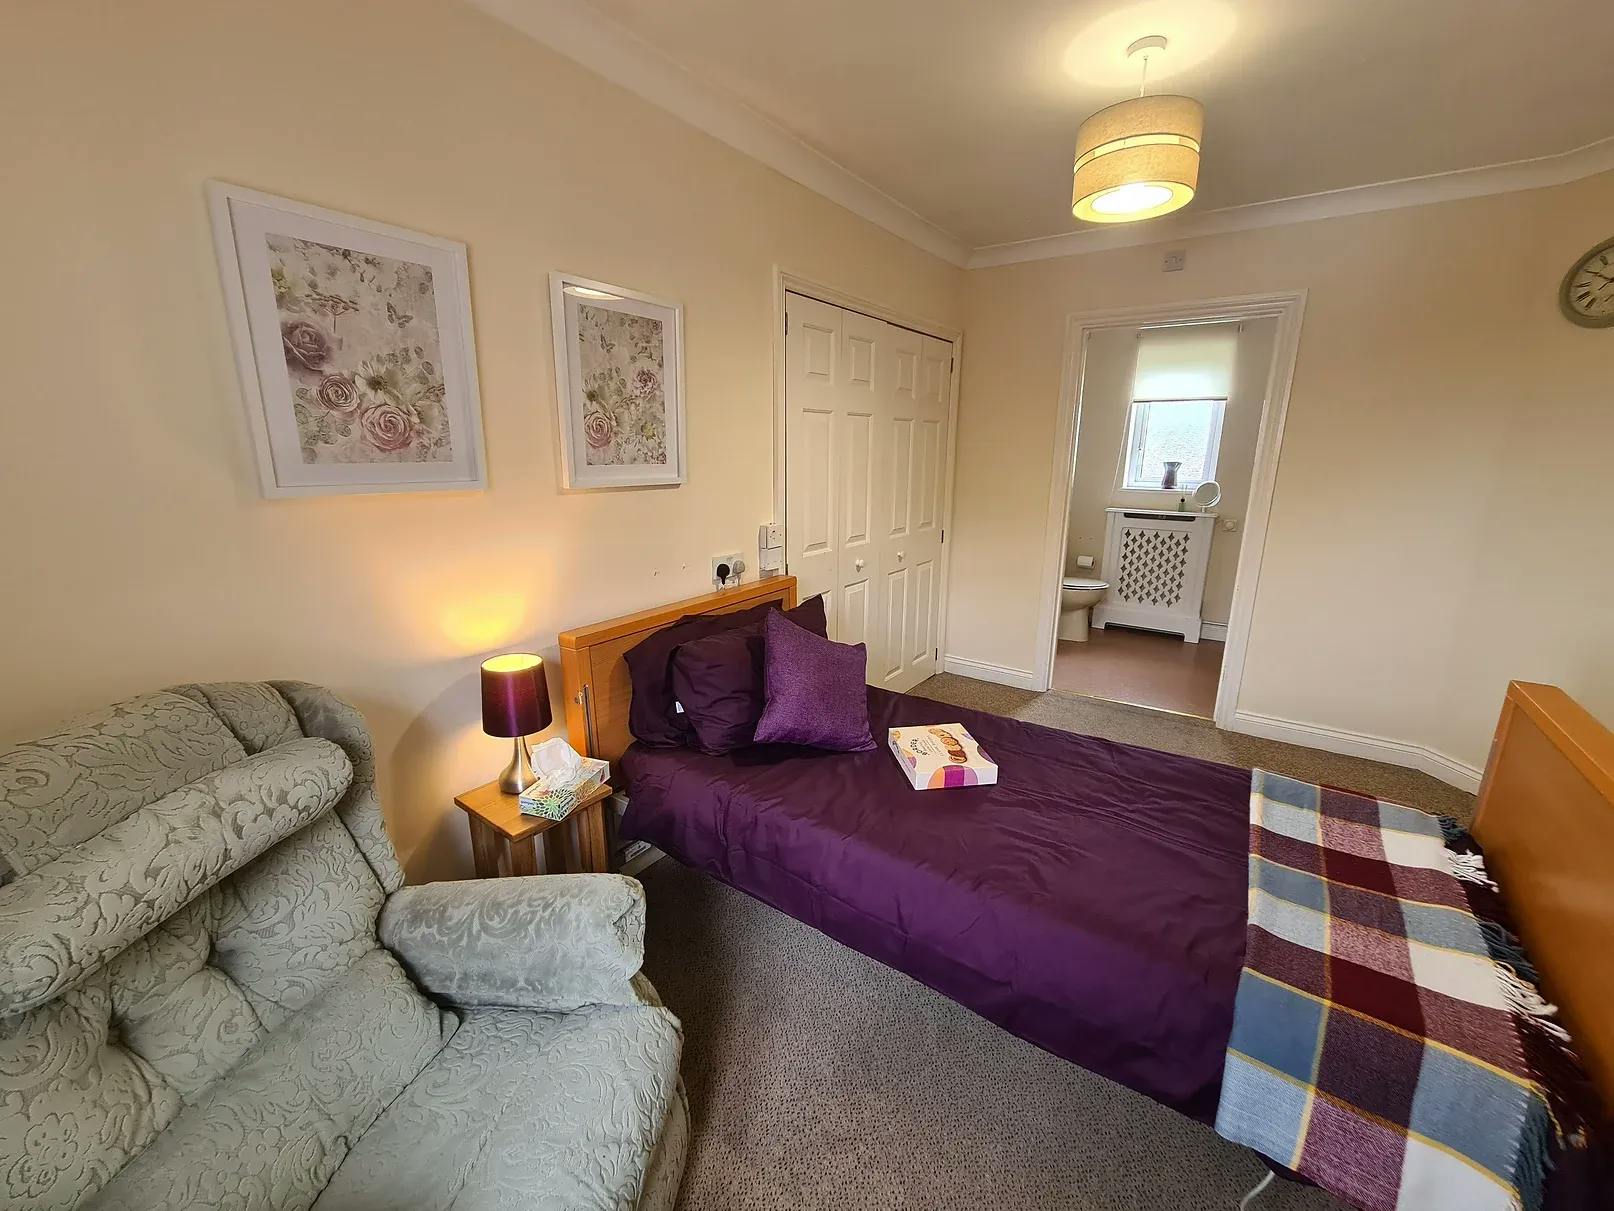 Sussex Grange Care Home in Selsey